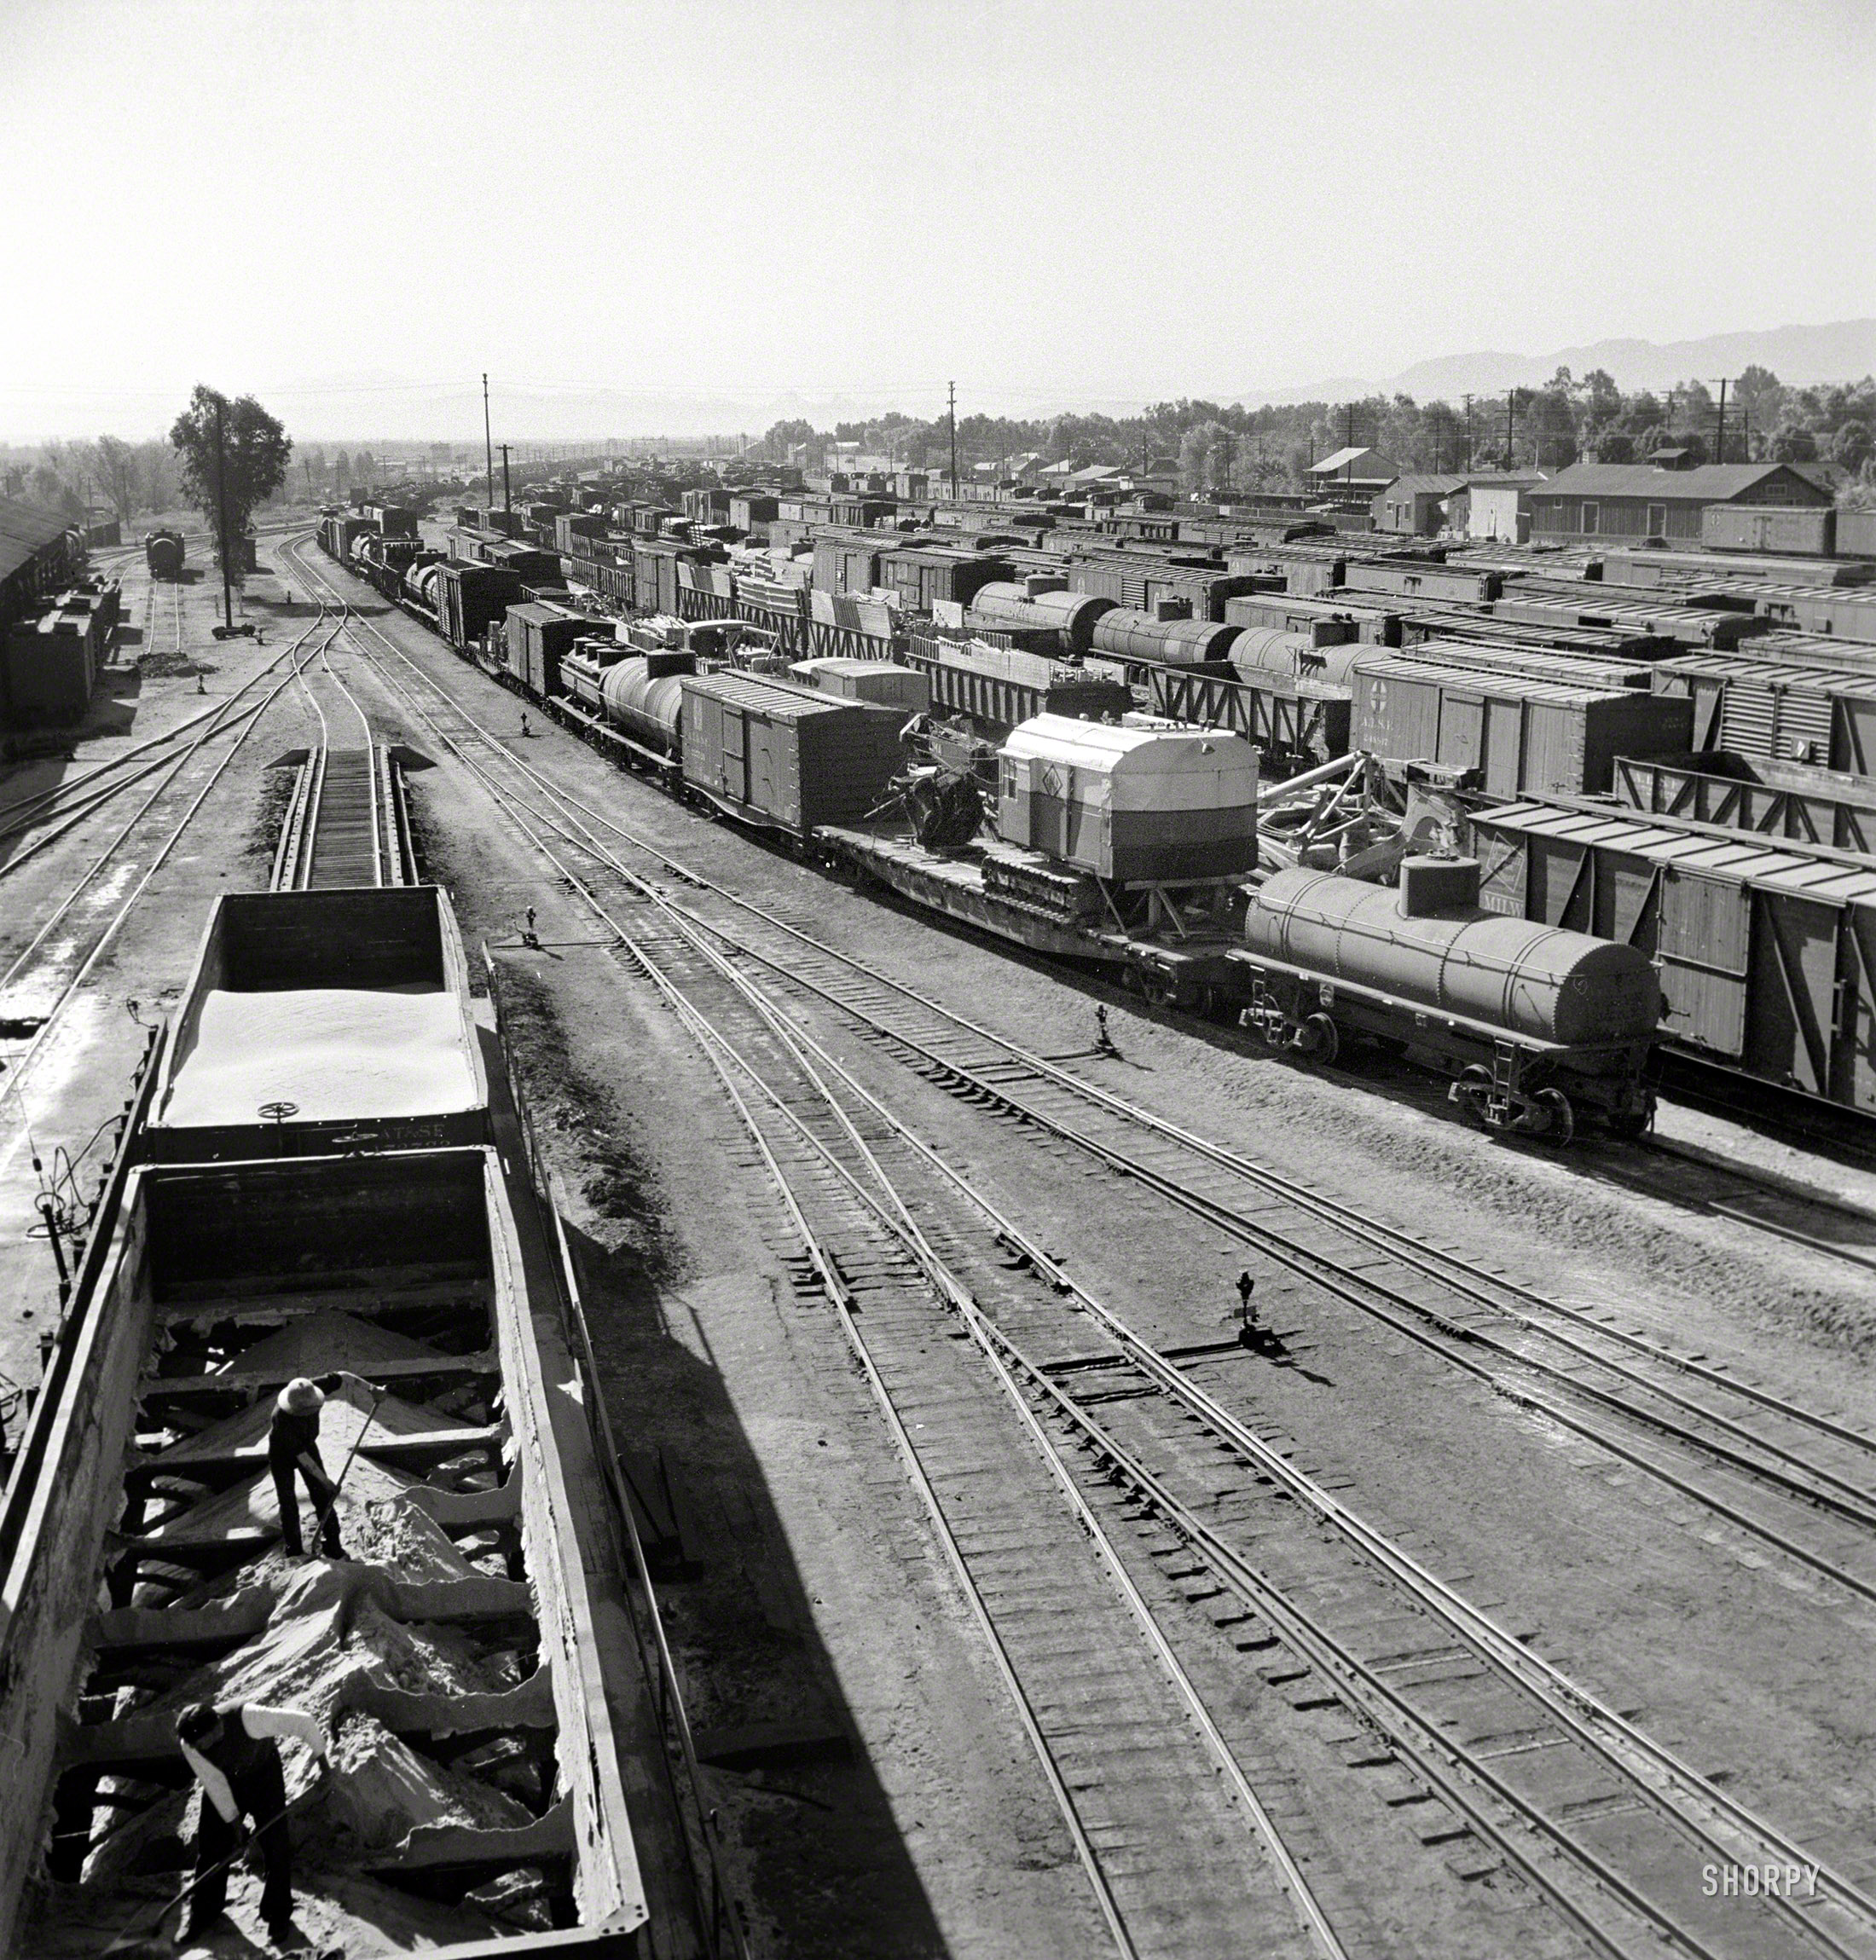 March 1943. "Needles, California. A general view of the Atchison, Topeka & Santa Fe rail yard." Photo by Jack Delano, Office of War Information. View full size.